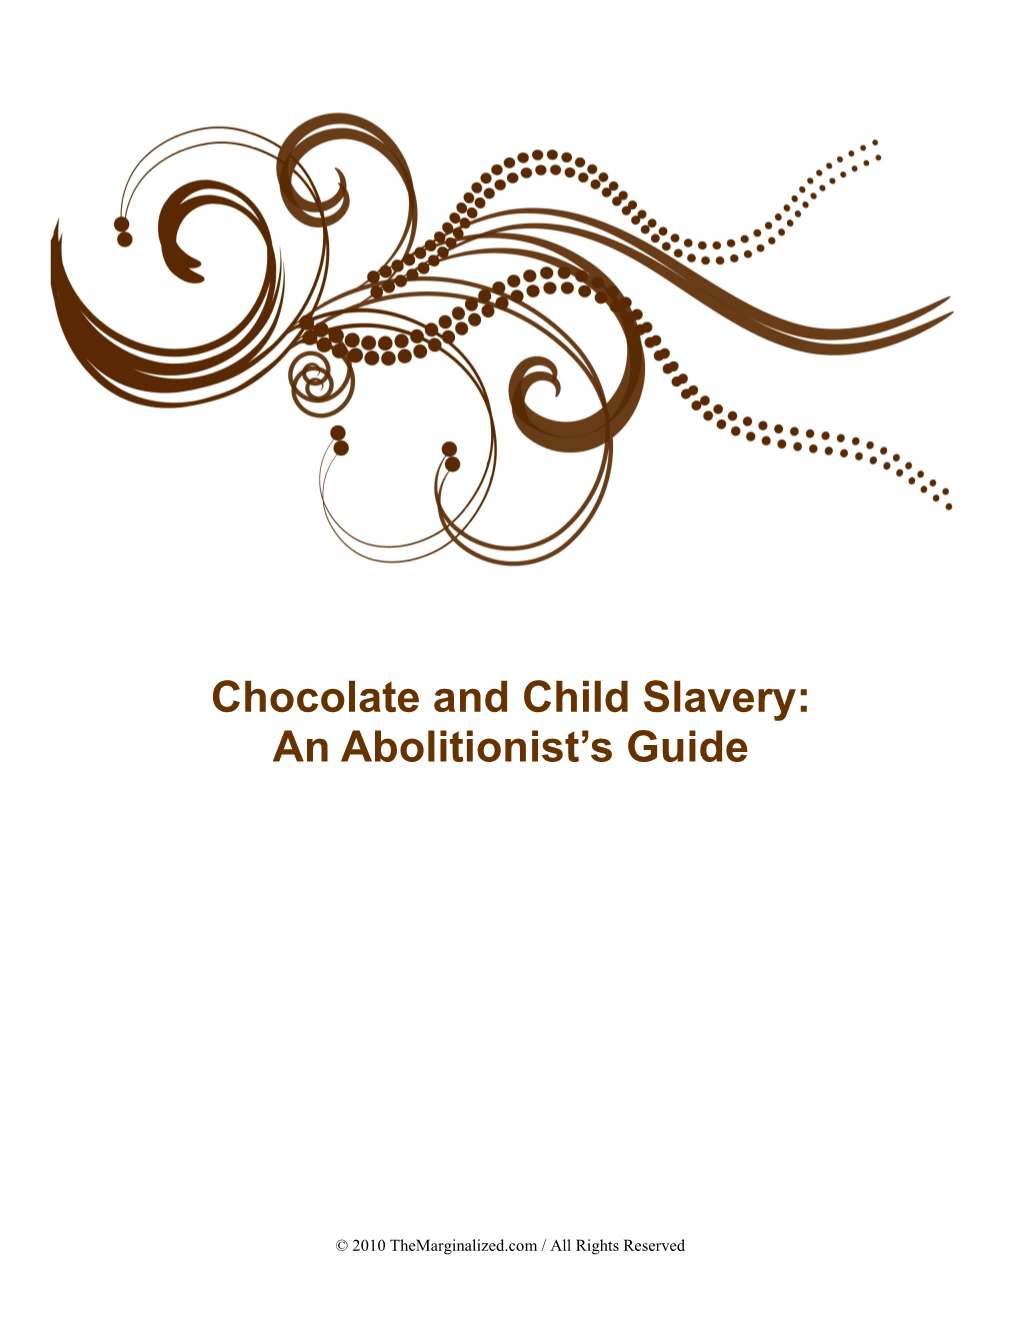 Chocolate and Child Slavery: an Abolitionist's Guide